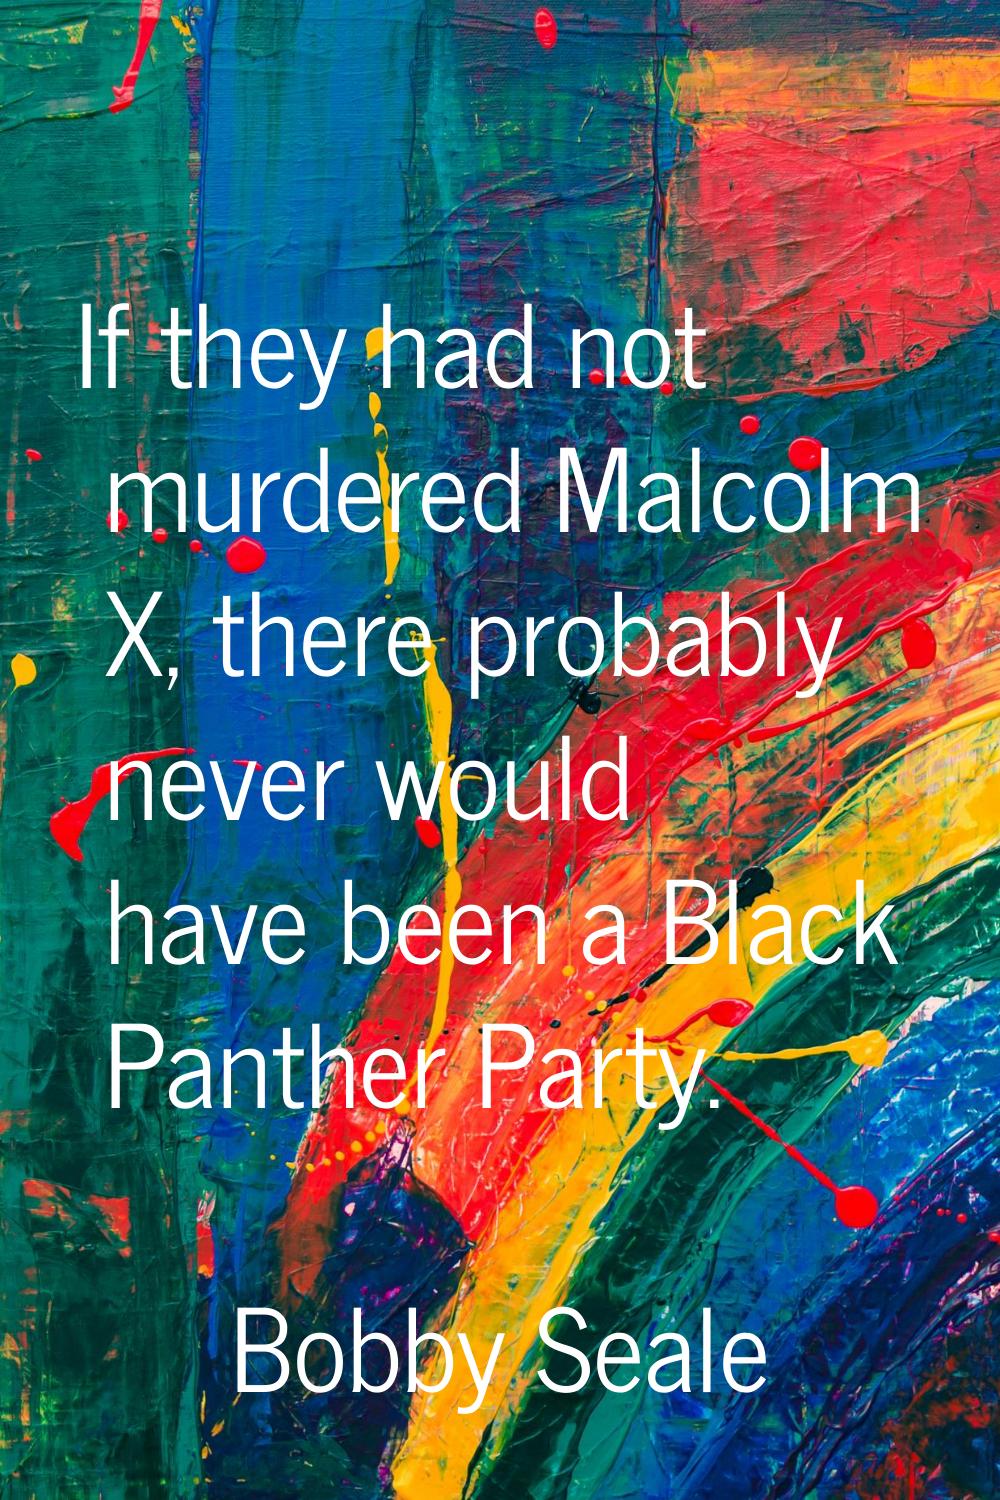 If they had not murdered Malcolm X, there probably never would have been a Black Panther Party.